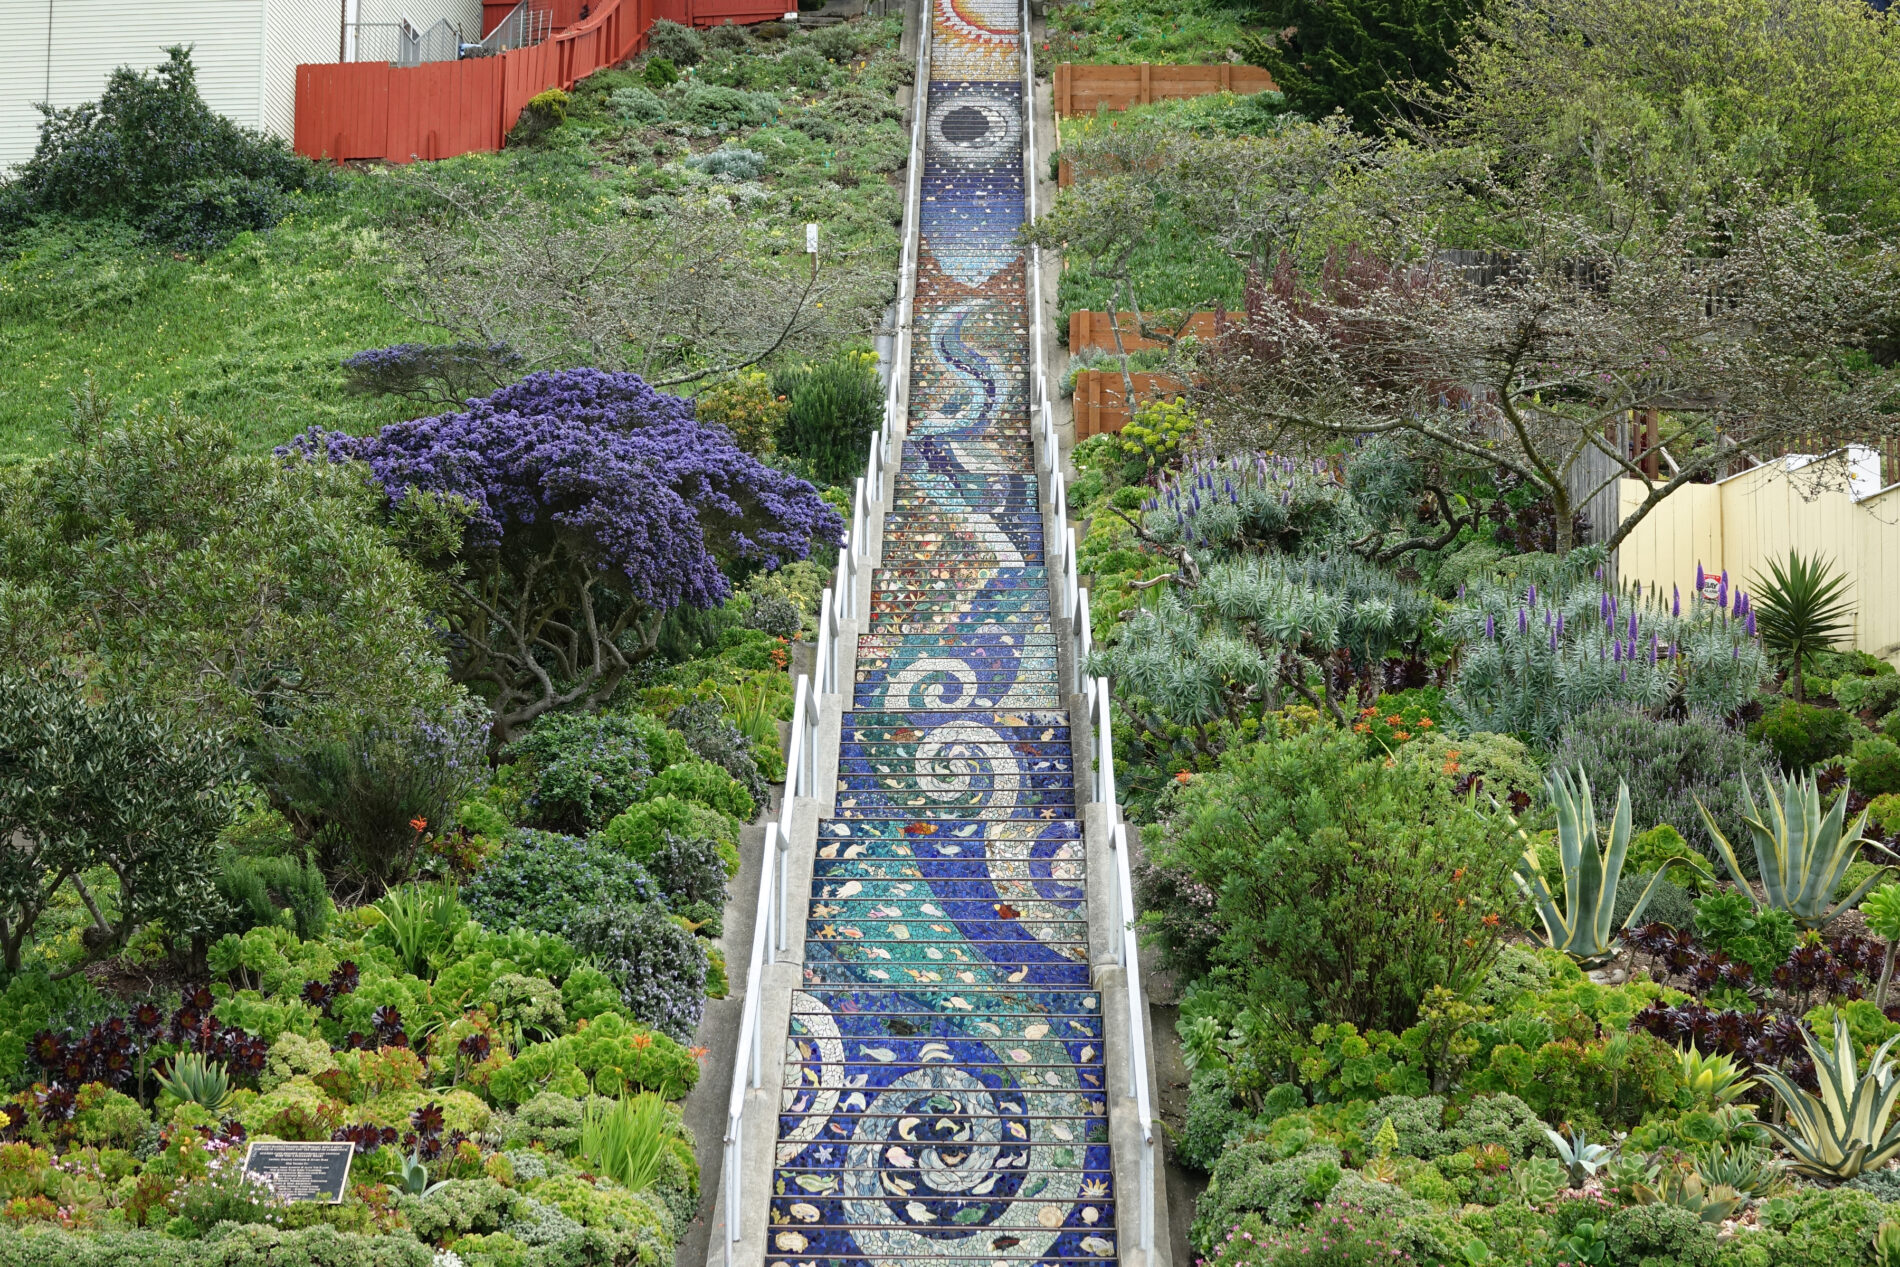 Mosaic tiles create an amazing Sea to Sun mural on the 16th avenue tiled steps in San Francisco.